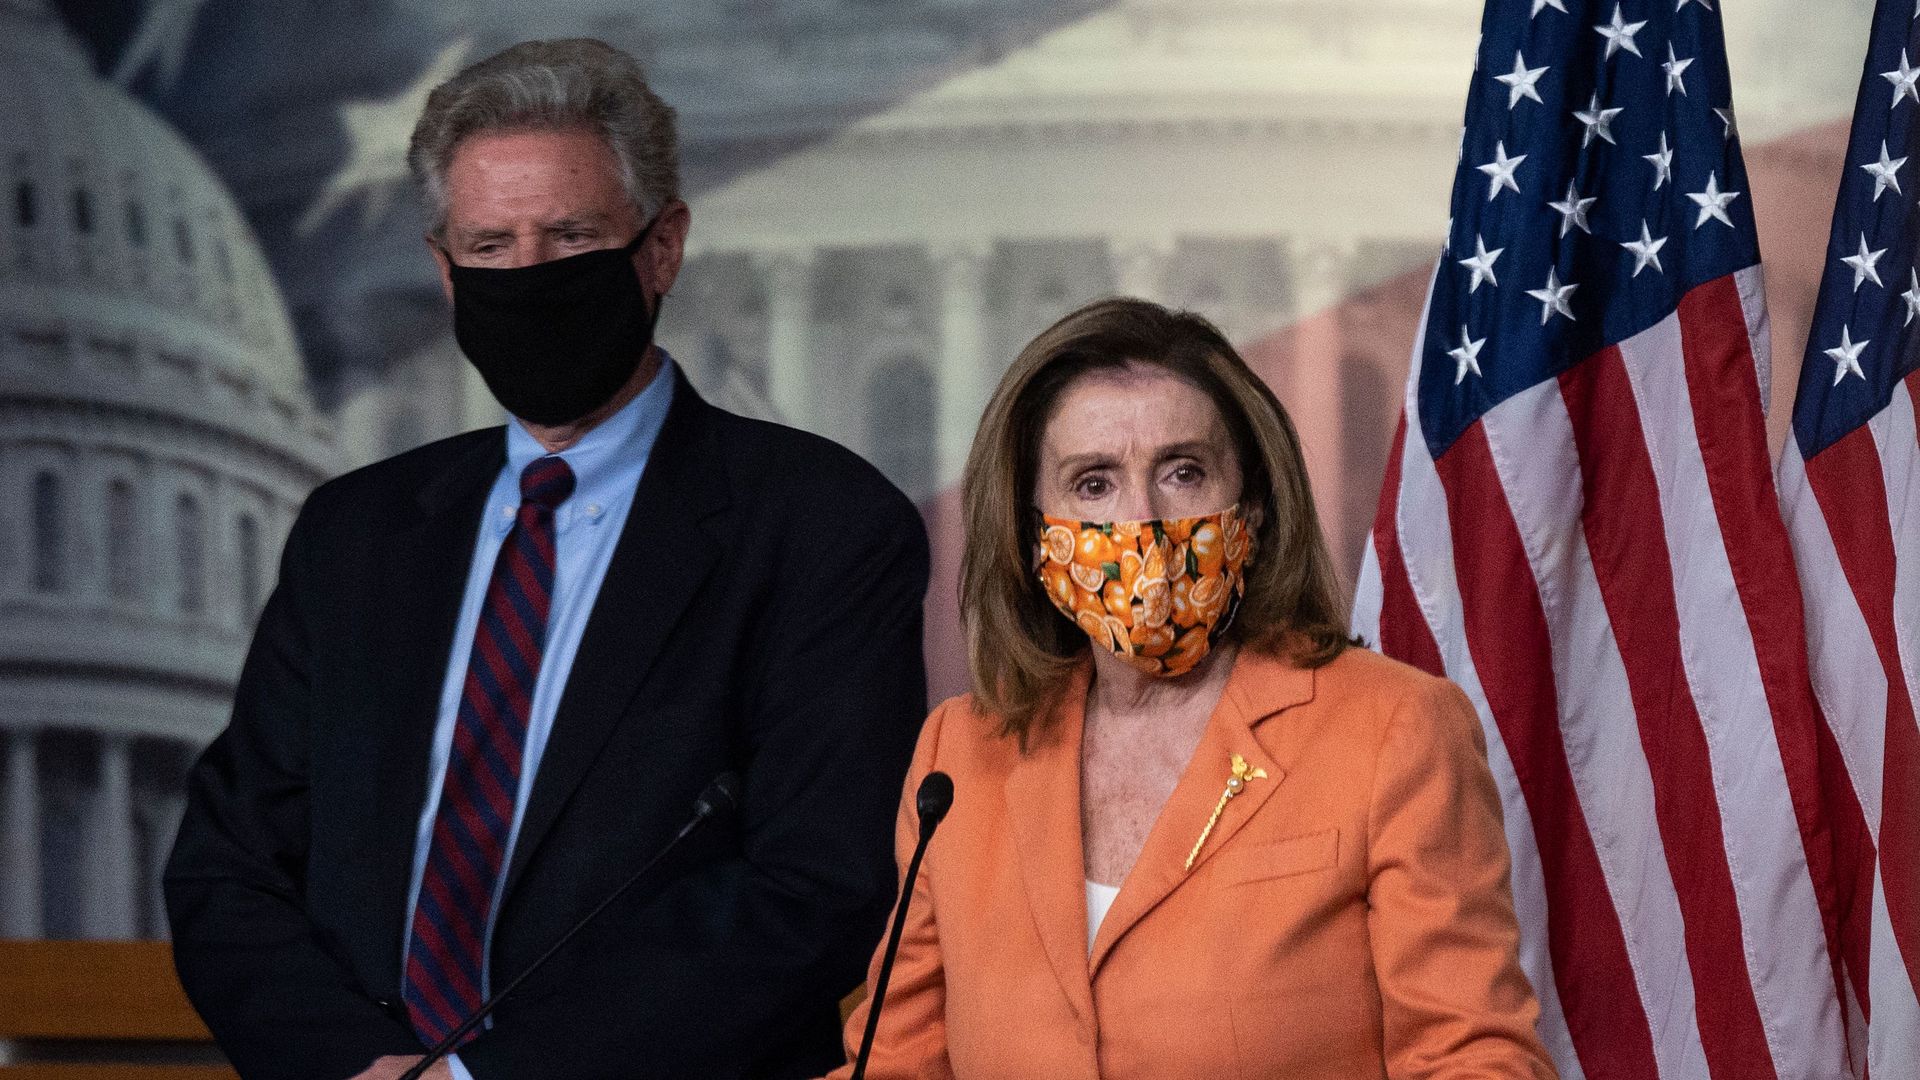 Speaker of the House Nancy Pelosi with Rep. Frank Pallone (D-N.J.) during a press conference on Oct. 8.